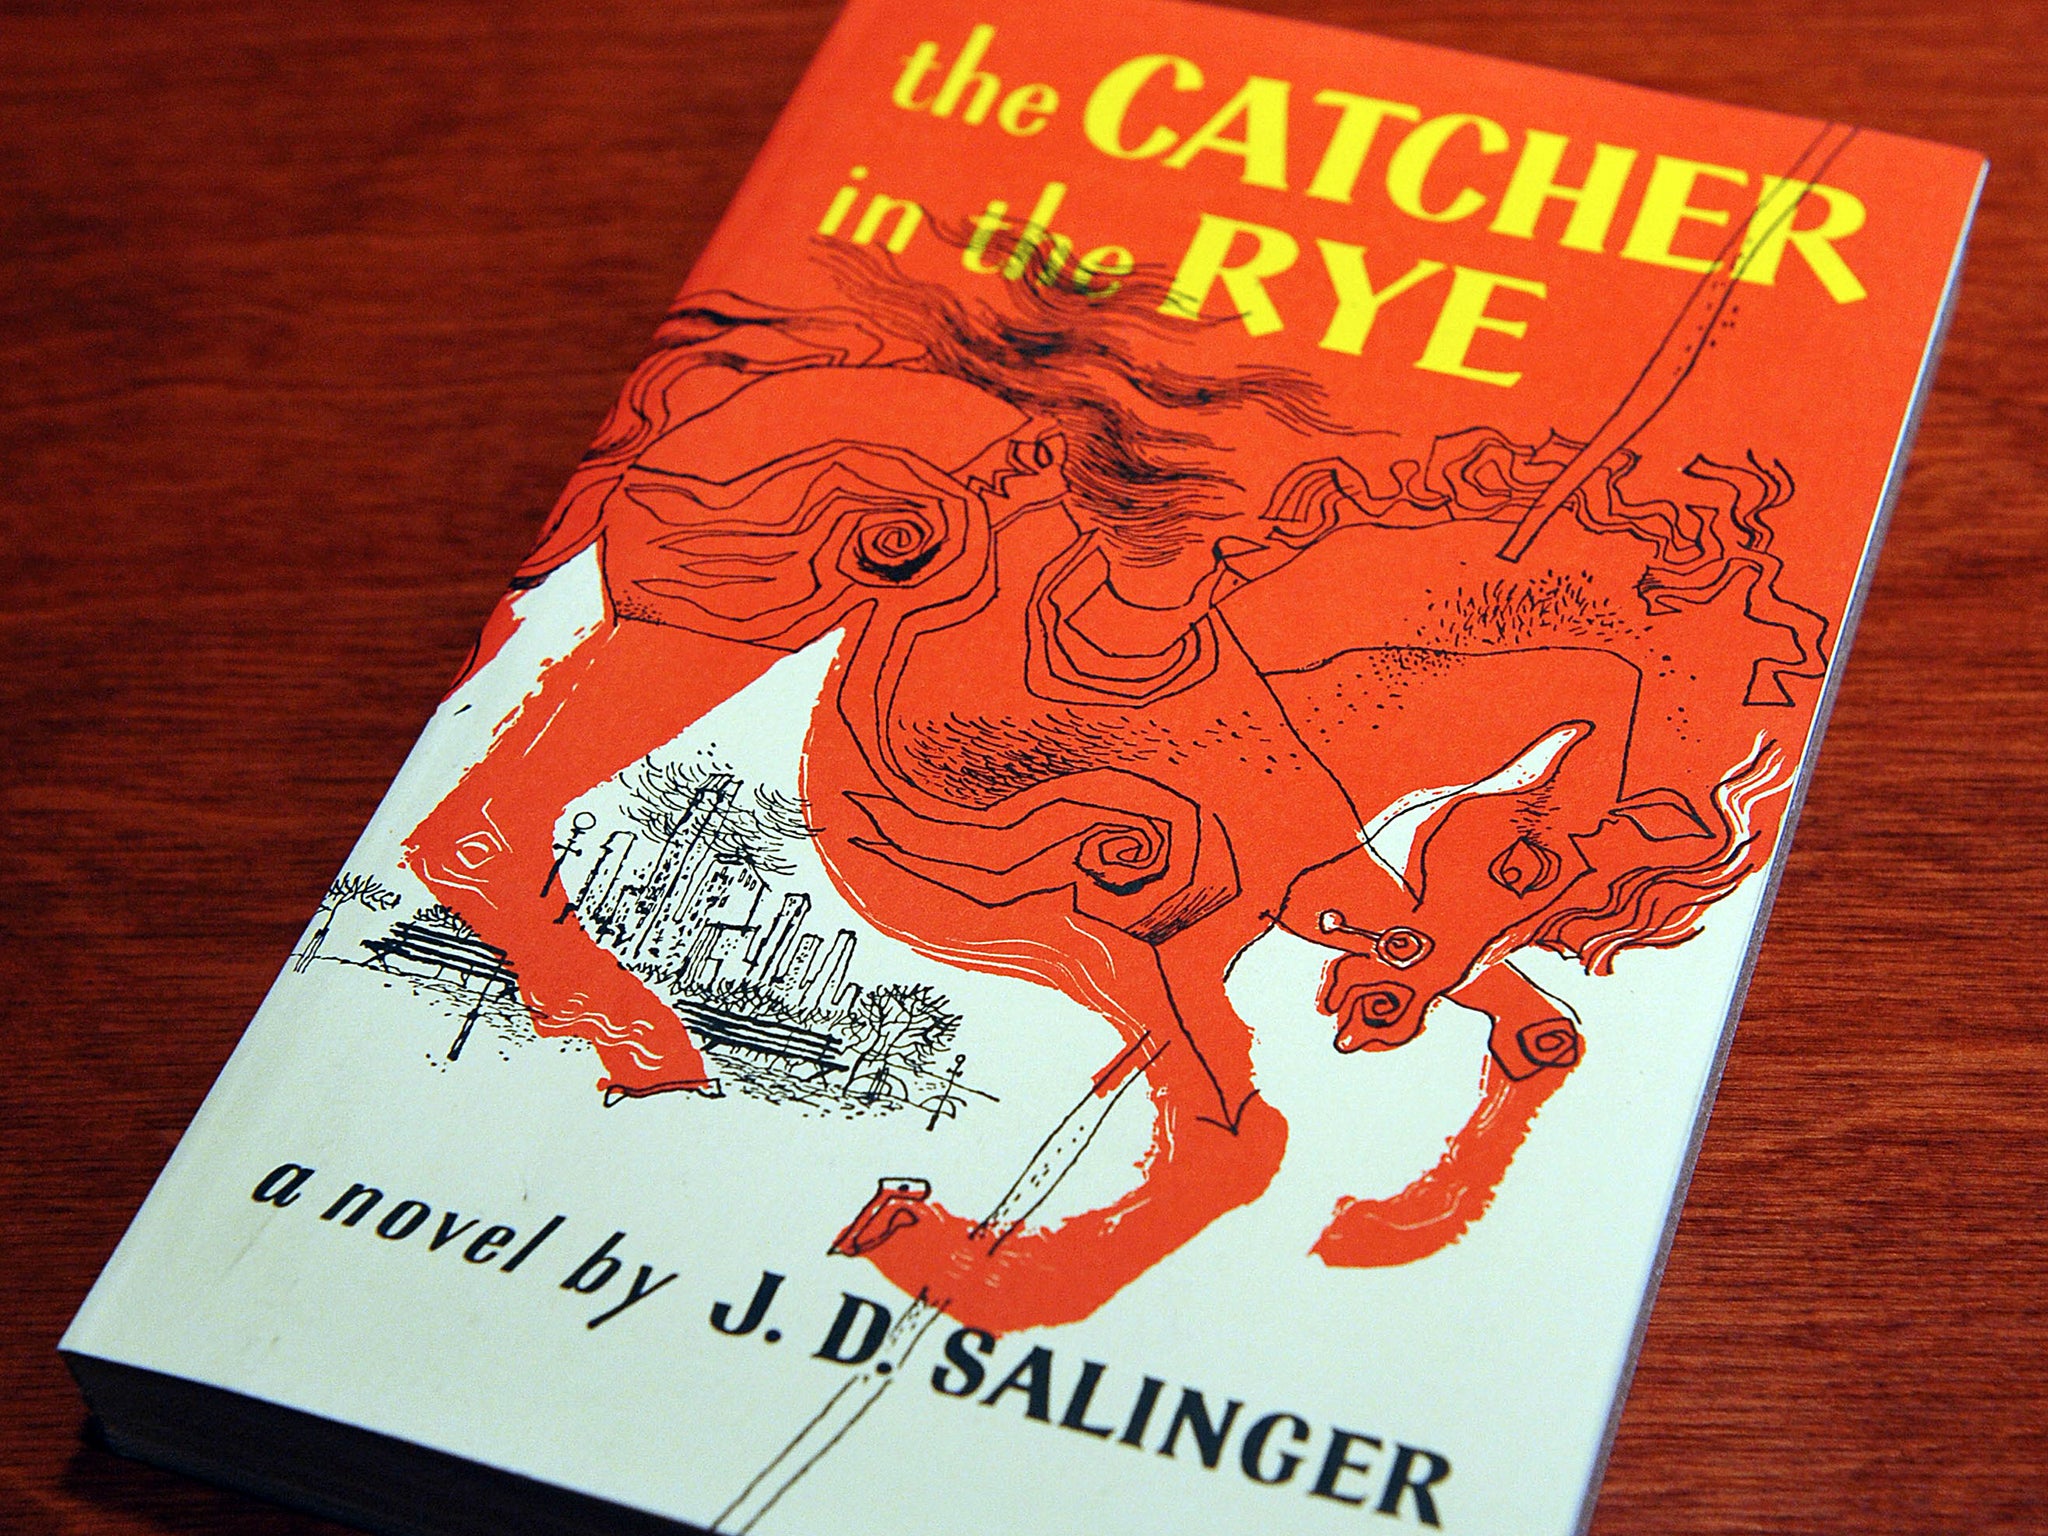 the catcher in the rye by j.d.salinger